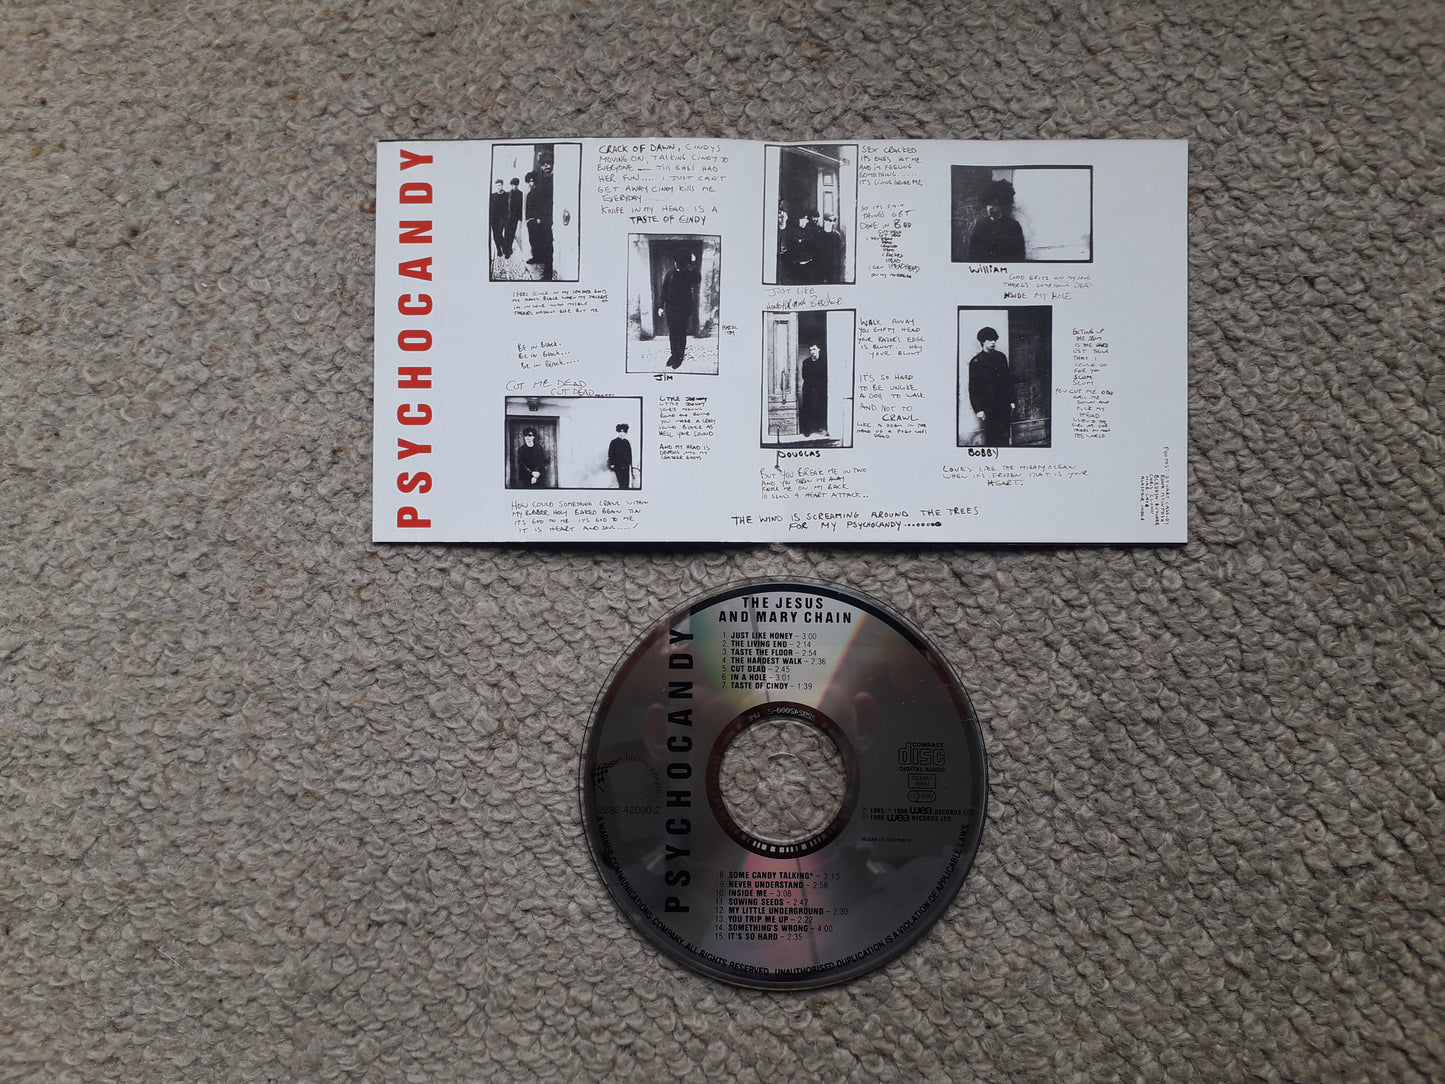 The Jesus And Mary Chain-Psychocandy CD (2292-42000-2)